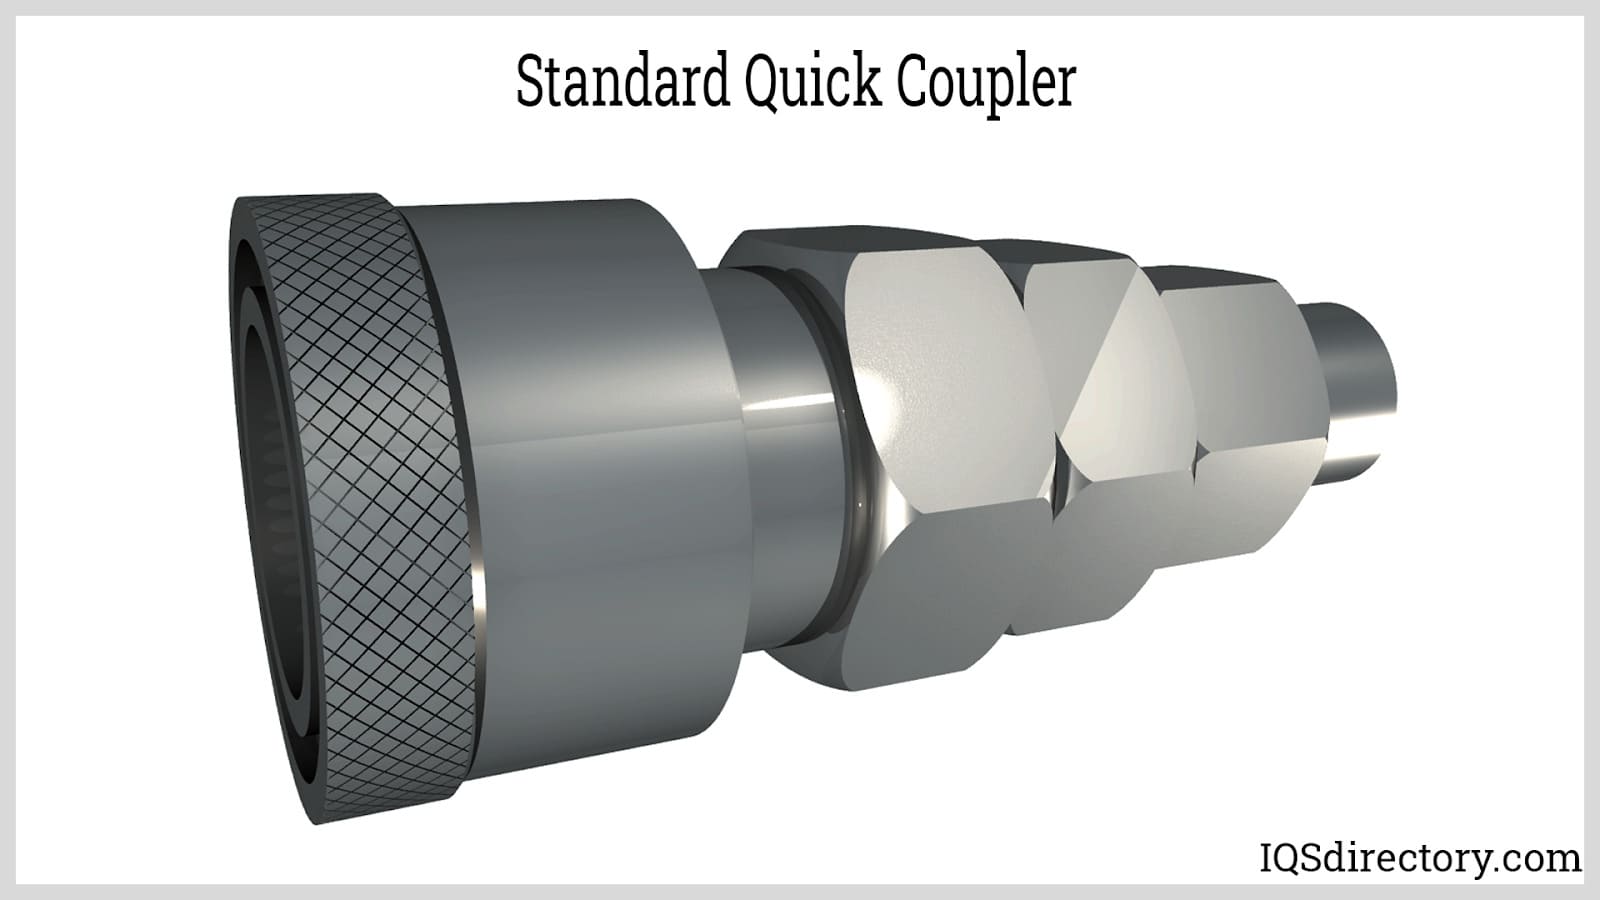 Quick Release Couplings: Types, Benefits, Classifications, and Purpose